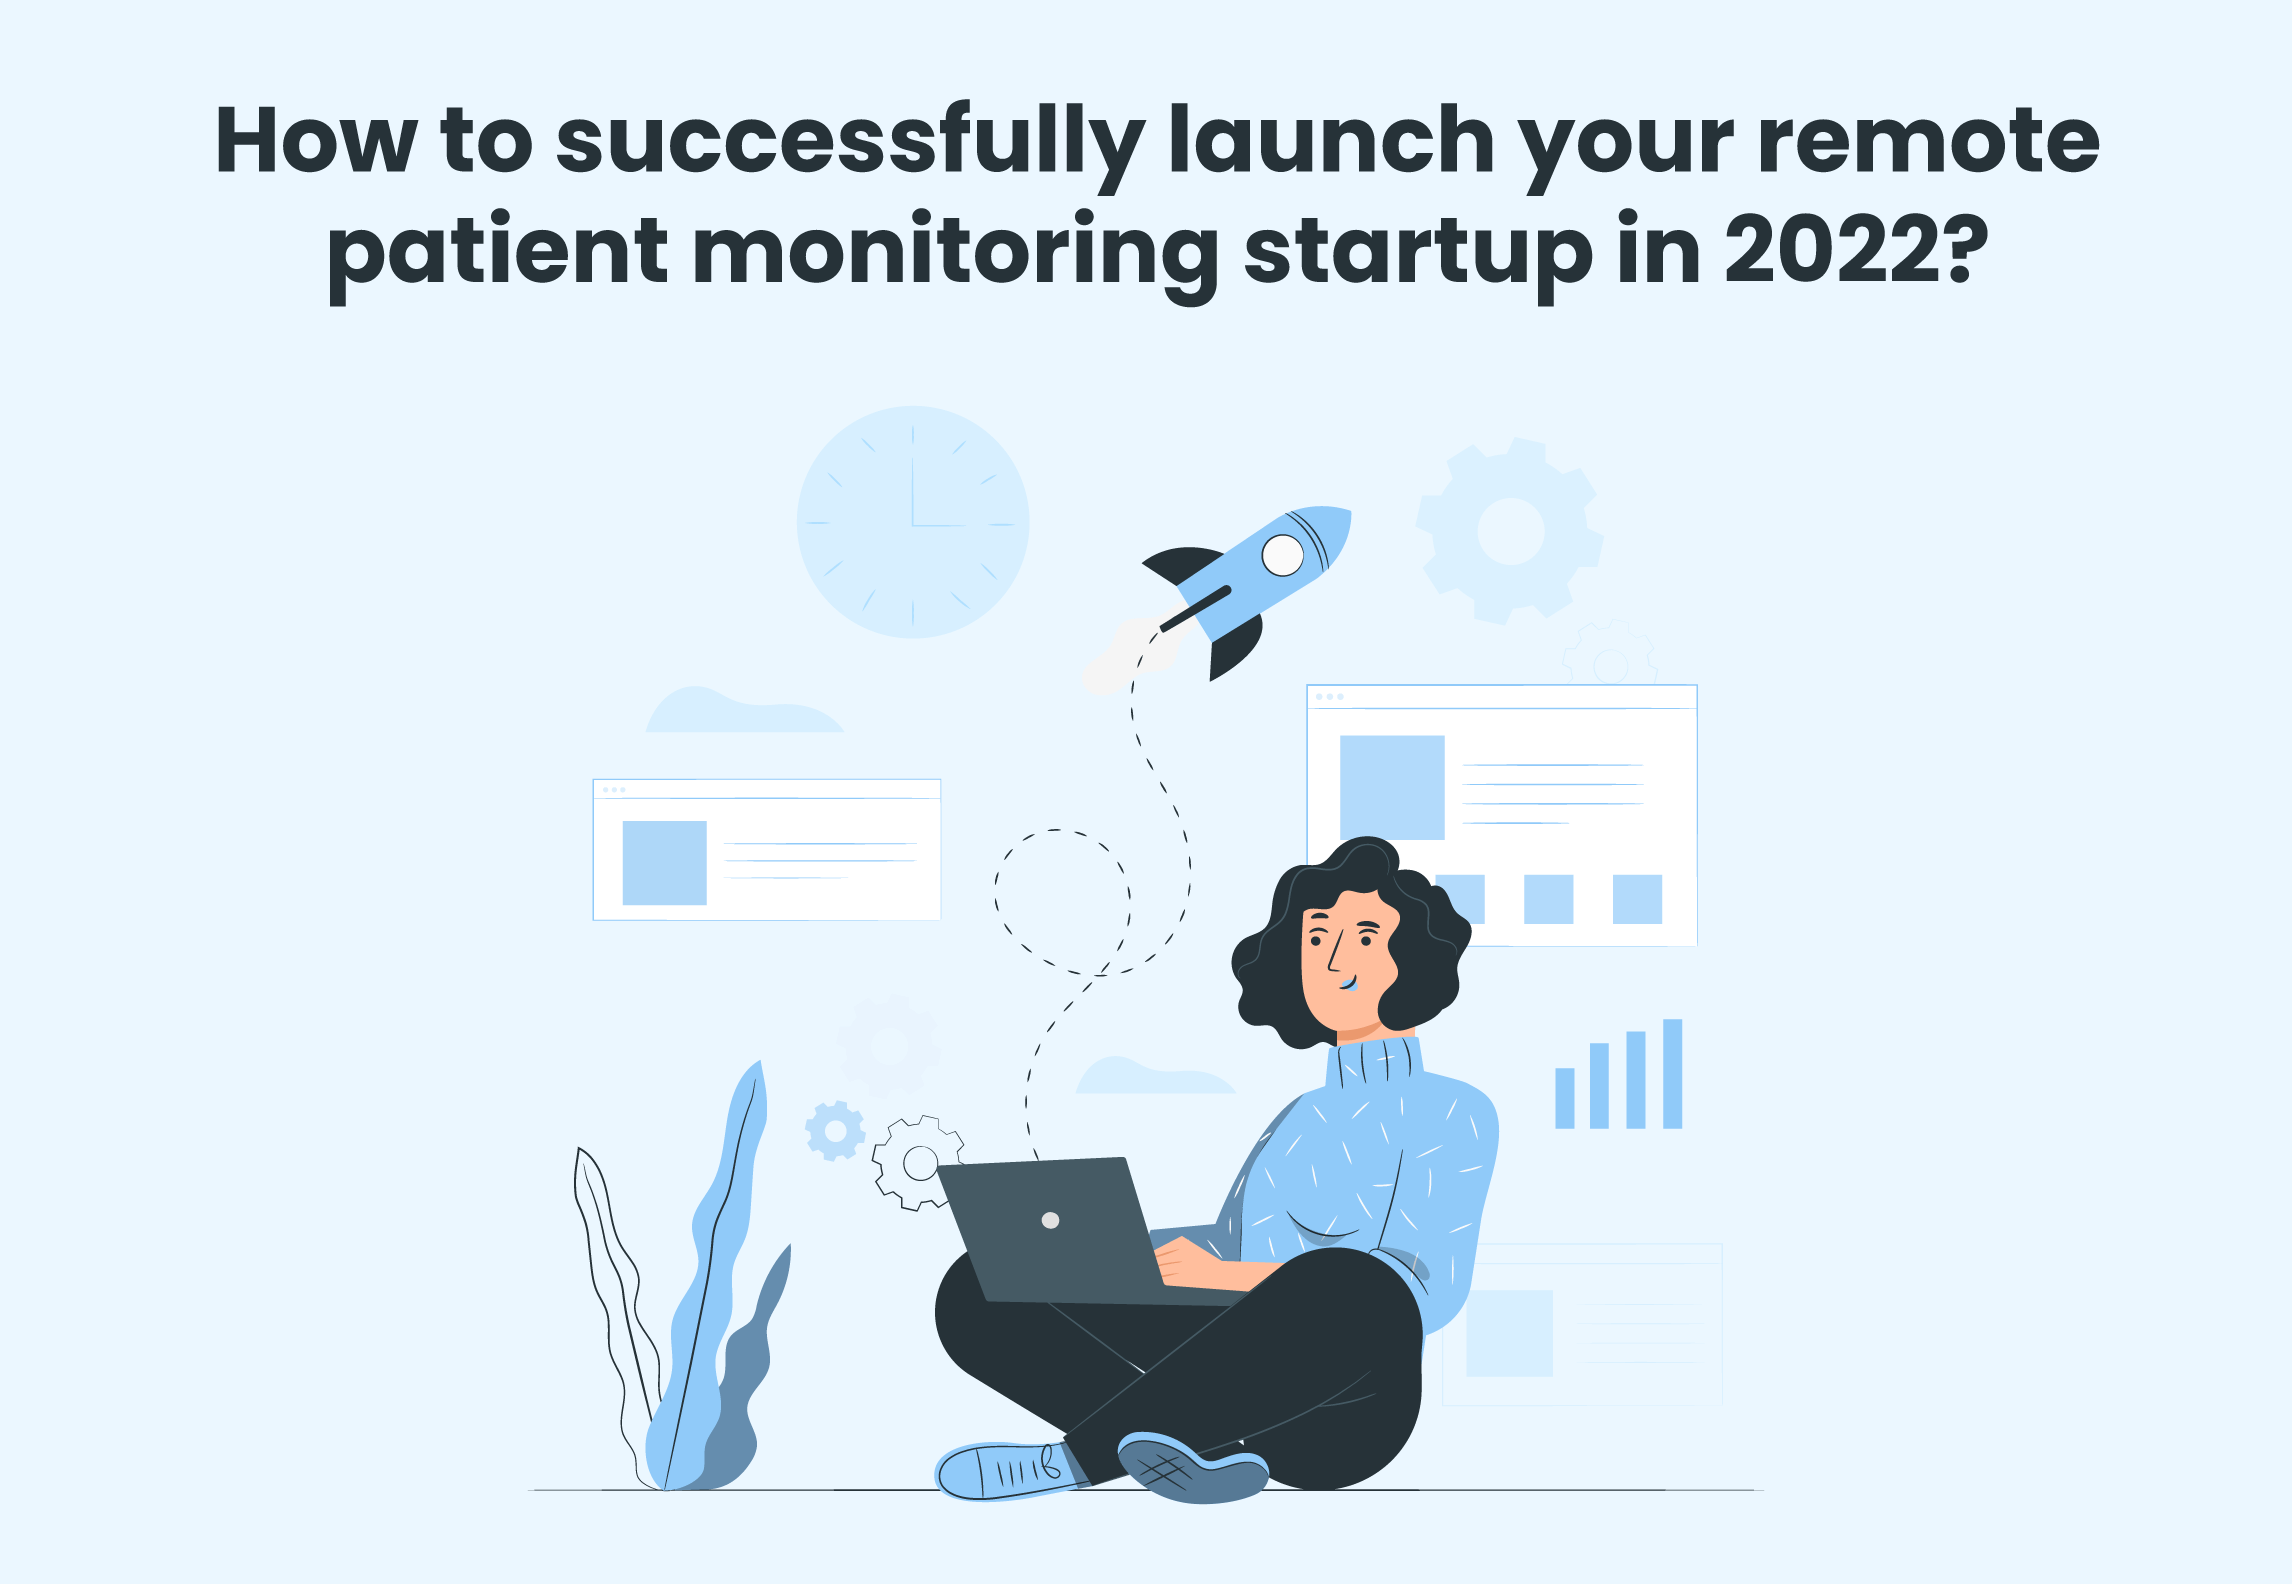 How to successfully launch your remote patient monitoring startup in 2022?